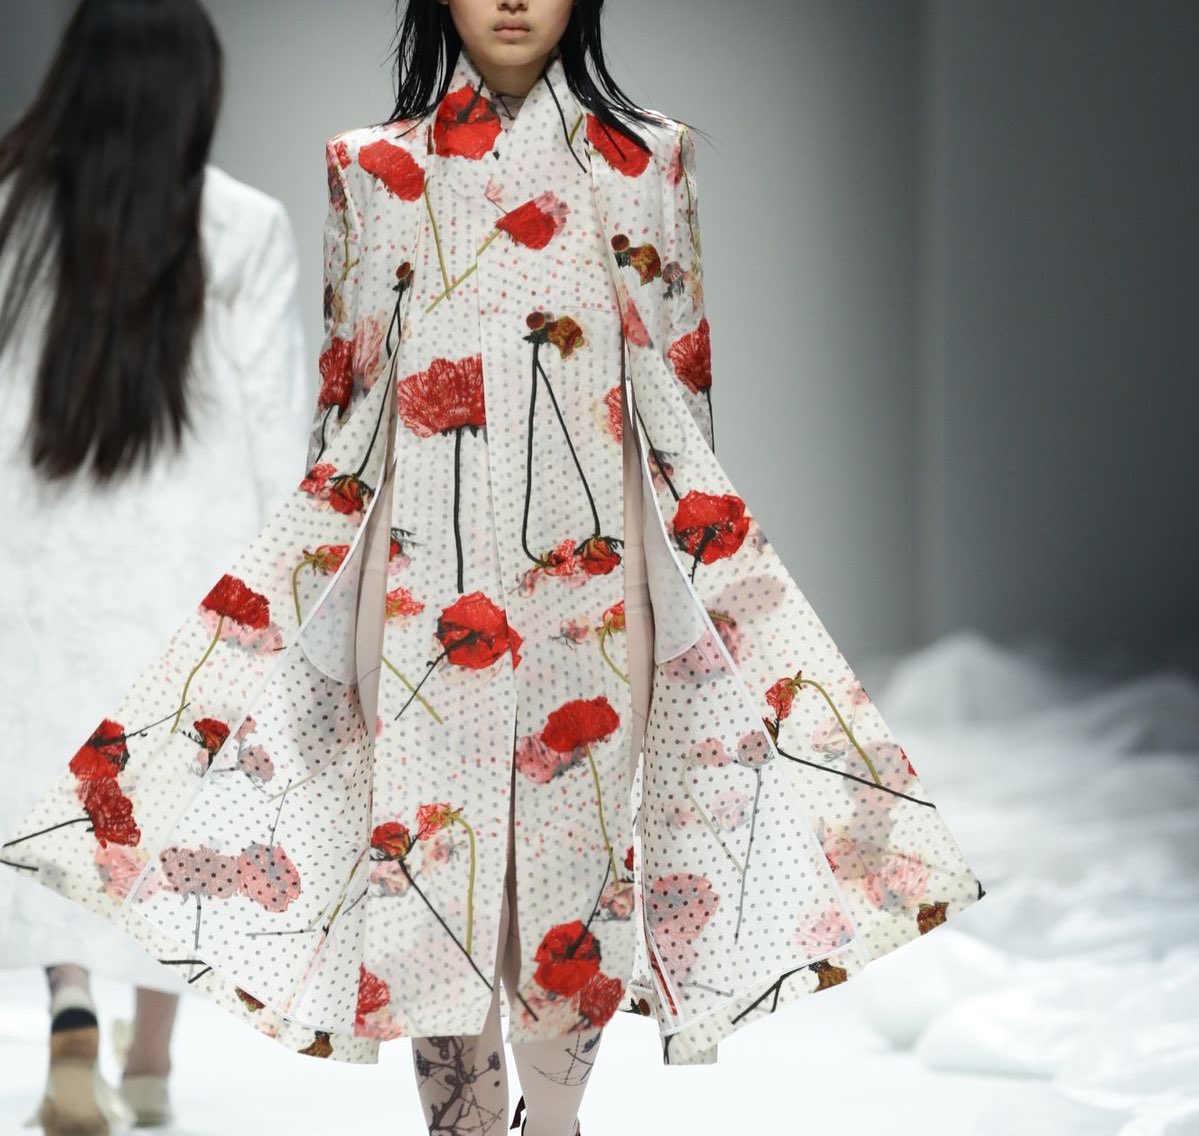 Ban Xiao Xue- winner of the Chinese section of the International Woolmark Prize- inspired by the beauty of nature- focuses on the deconstruction of silhouettes to weaken gender barriers